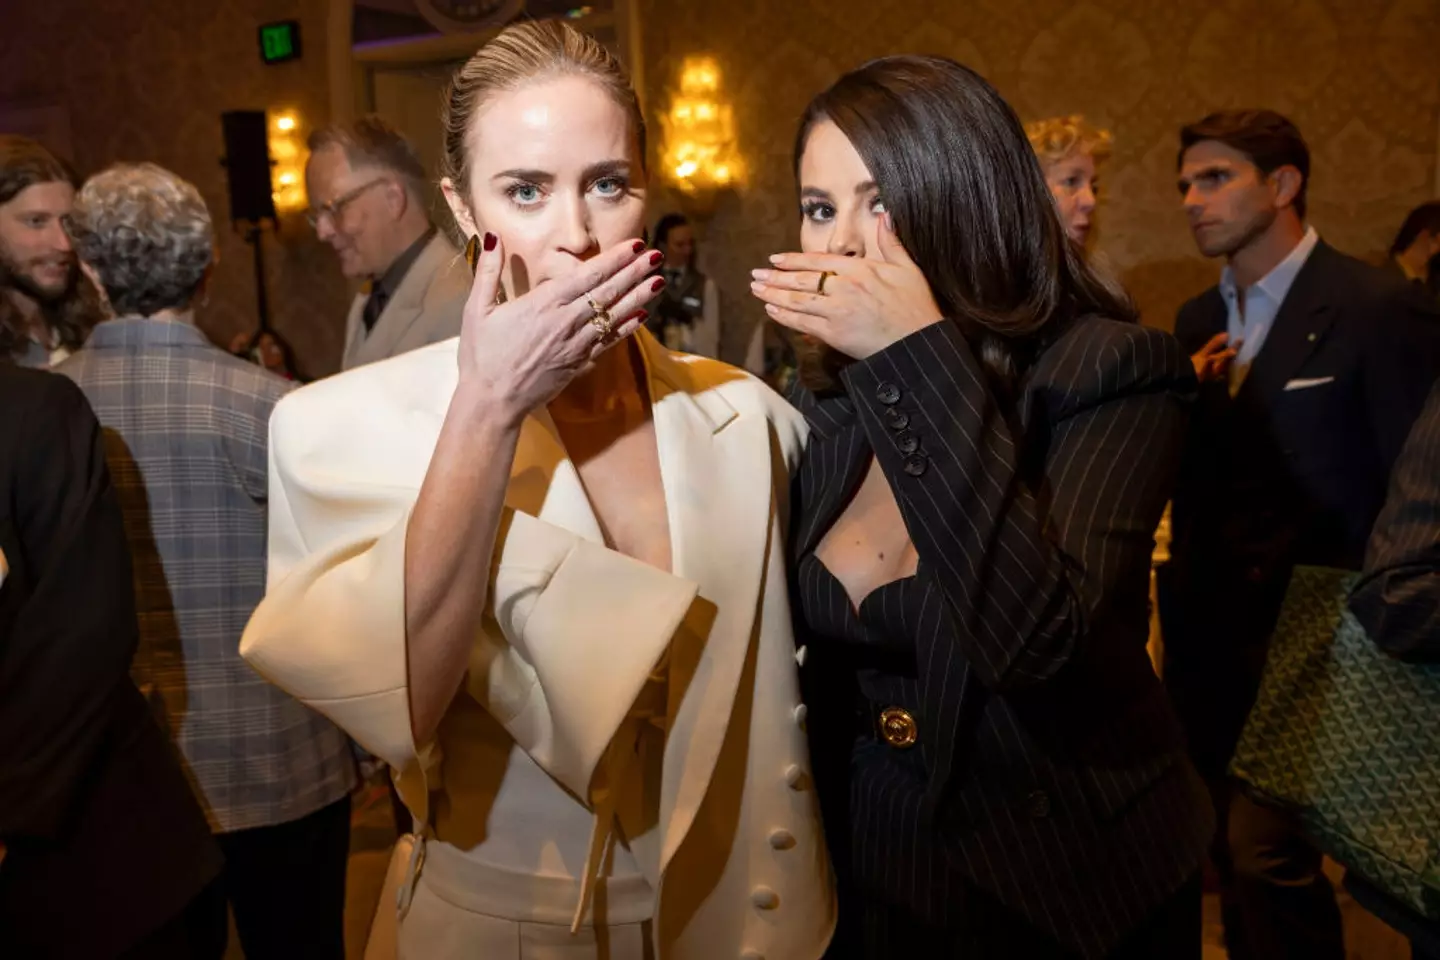 Why did Selena Gomez and Emily Blunt cover their faces for this photo?